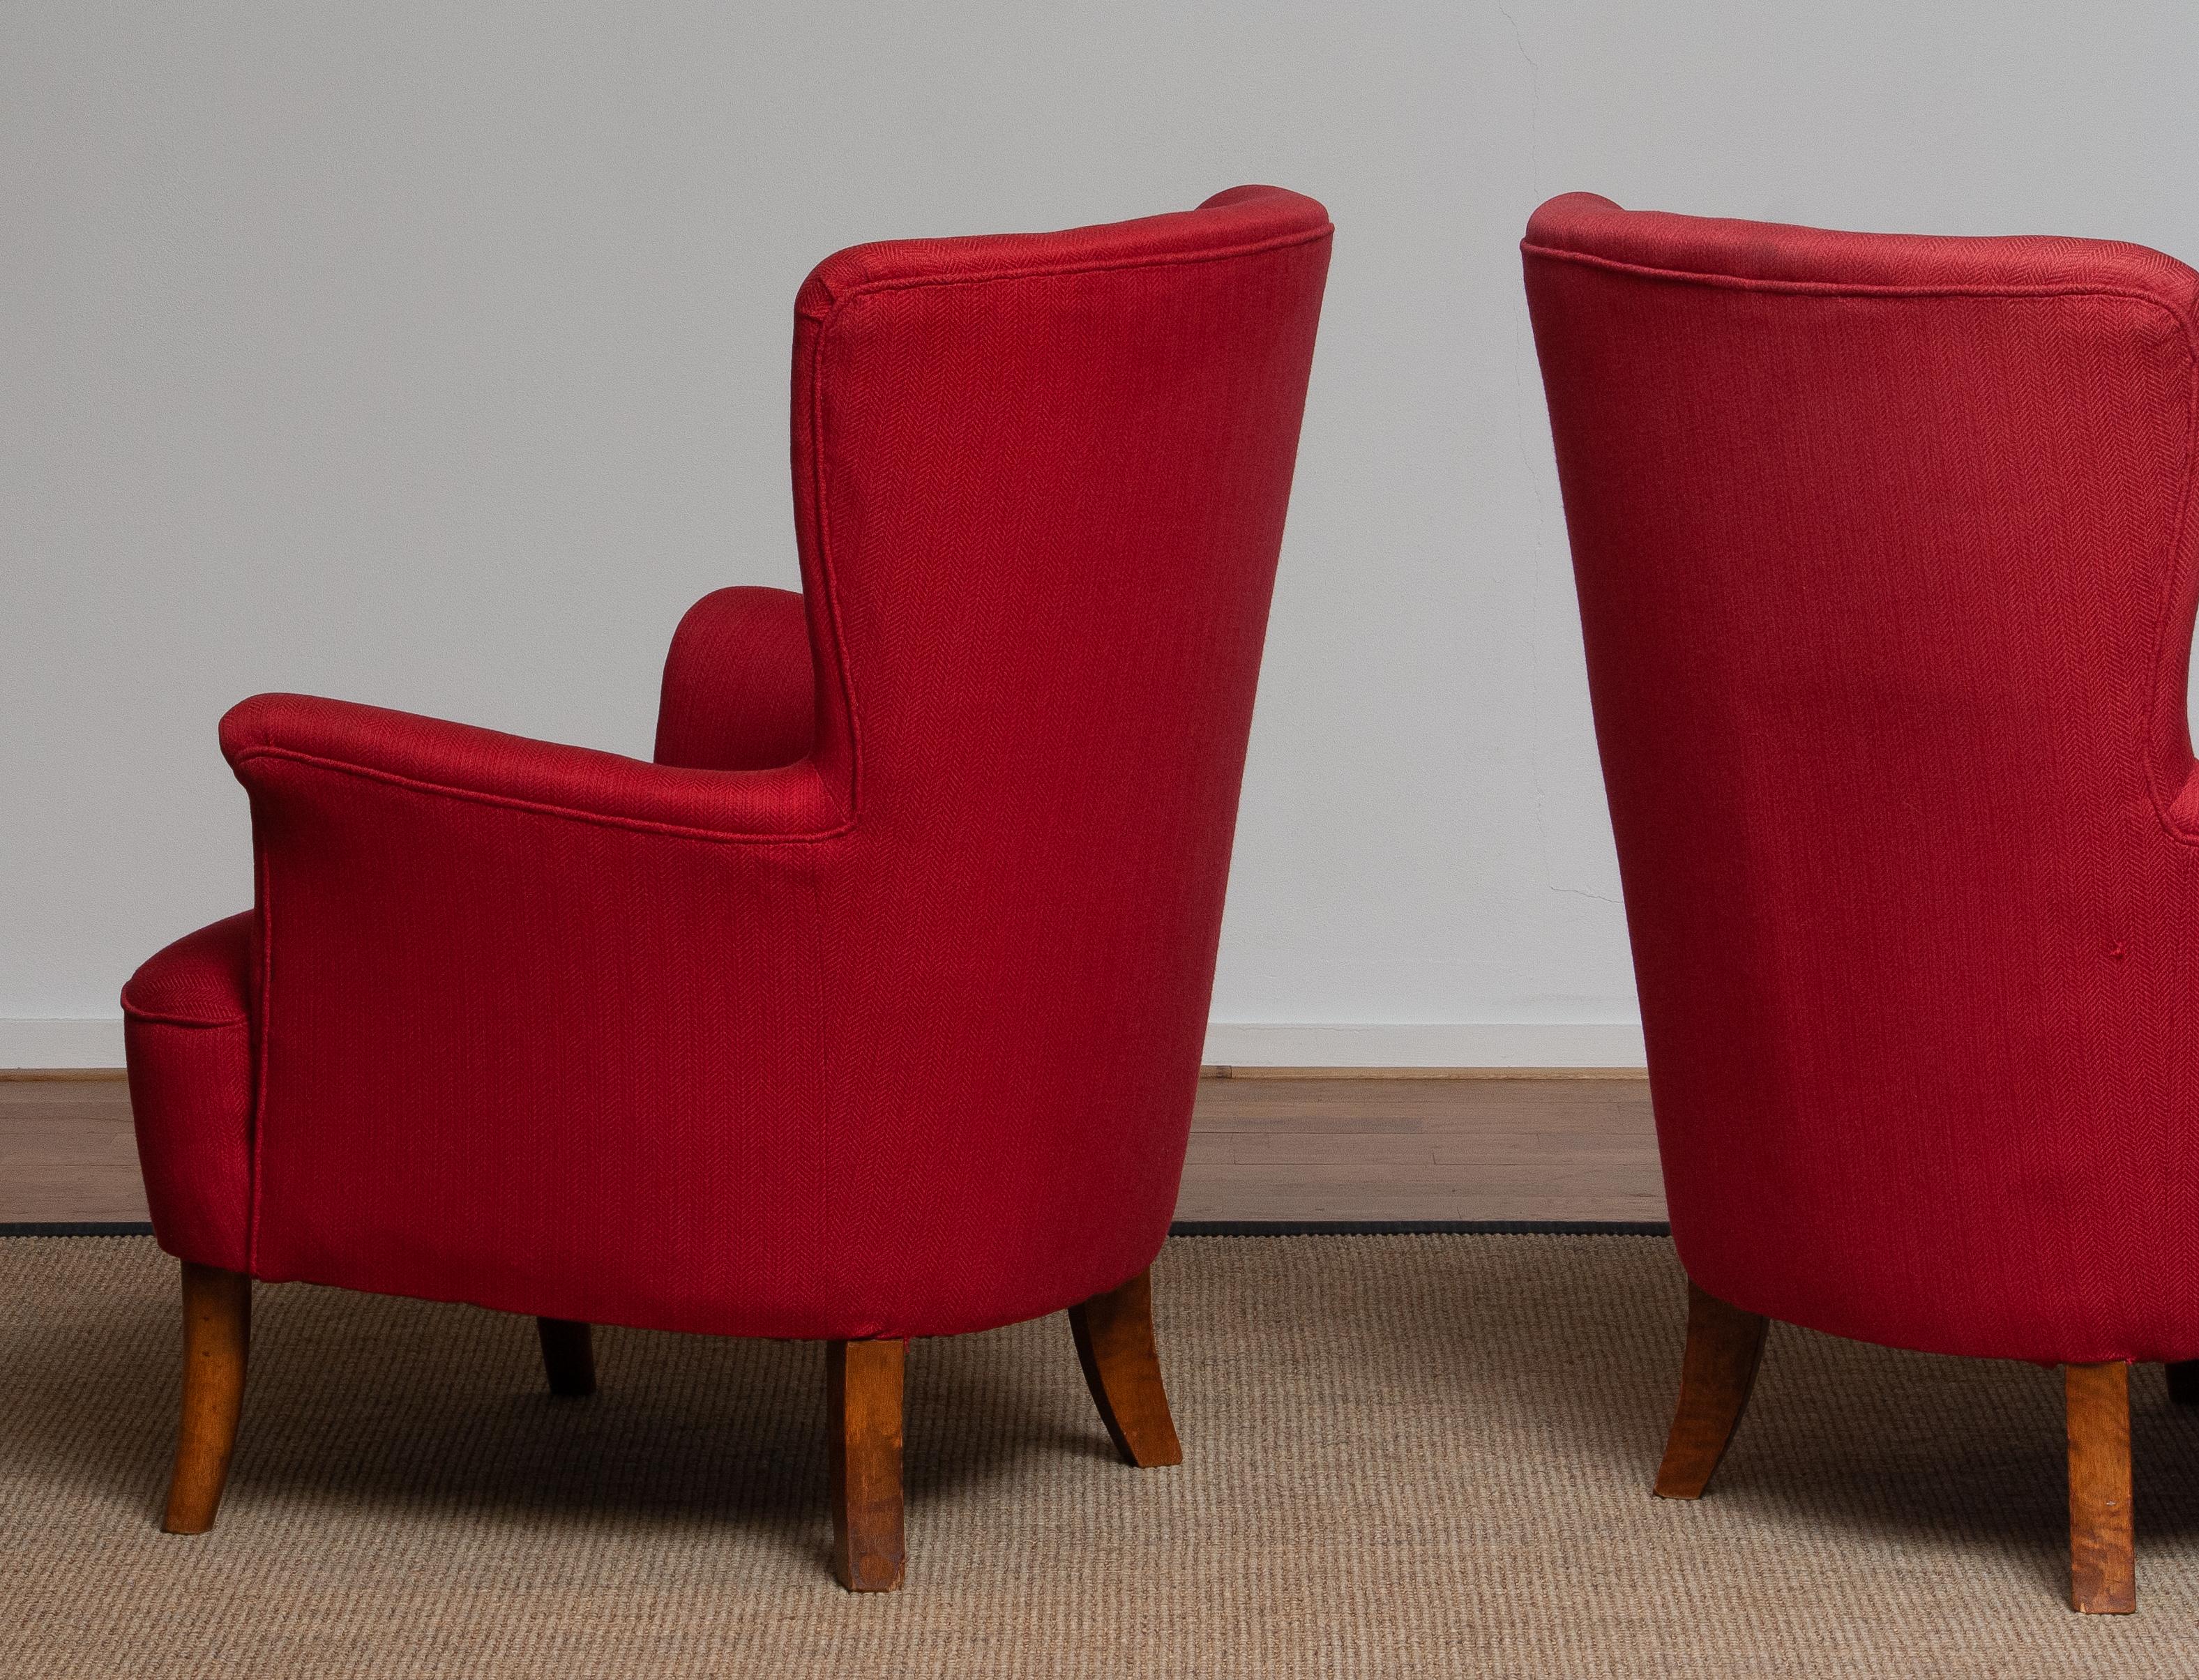 1940s, Pair of Fuchsia Easy or Lounge Chair by Carl Malmsten for Oh Sjögren 3